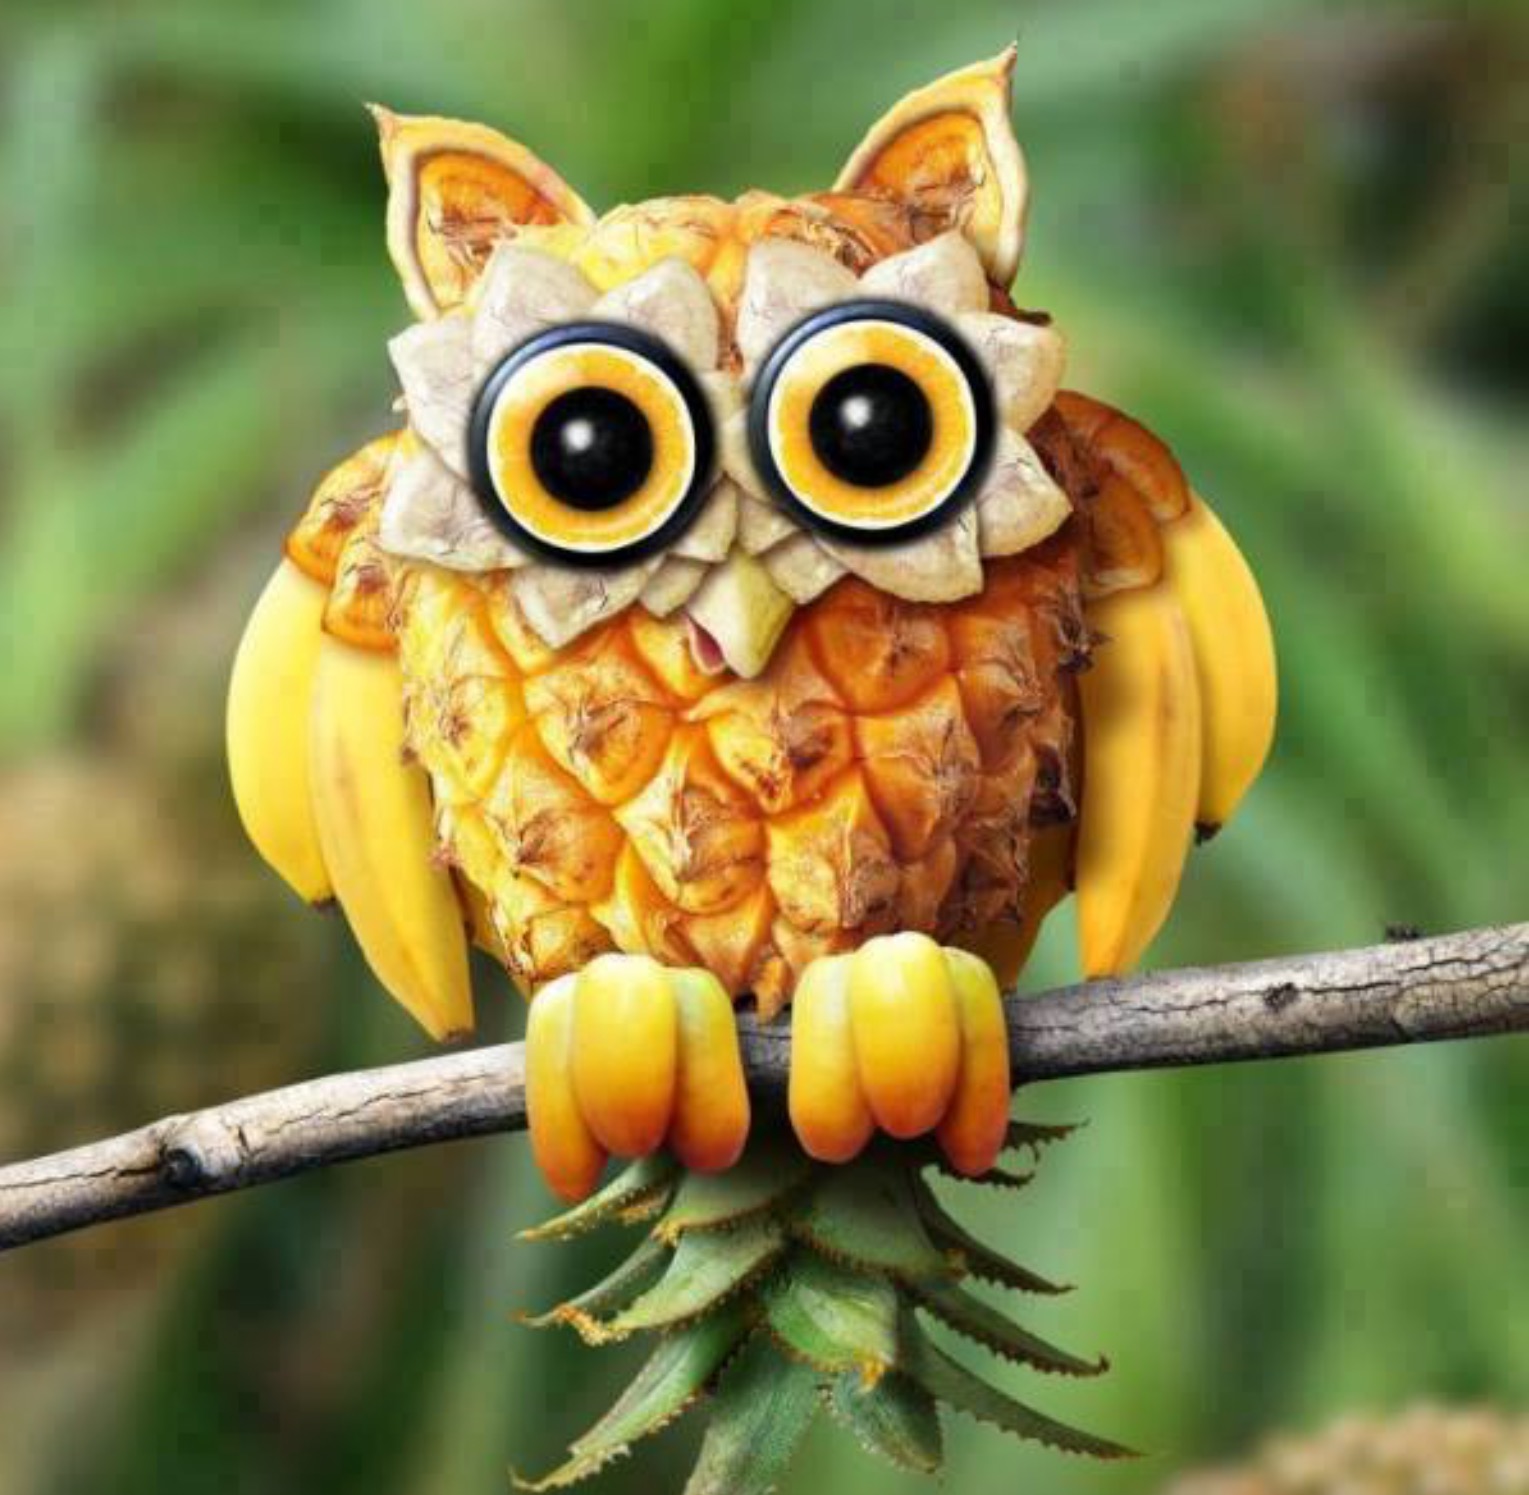 Clever Photos of Animals Made Out of Food | PetaPixel